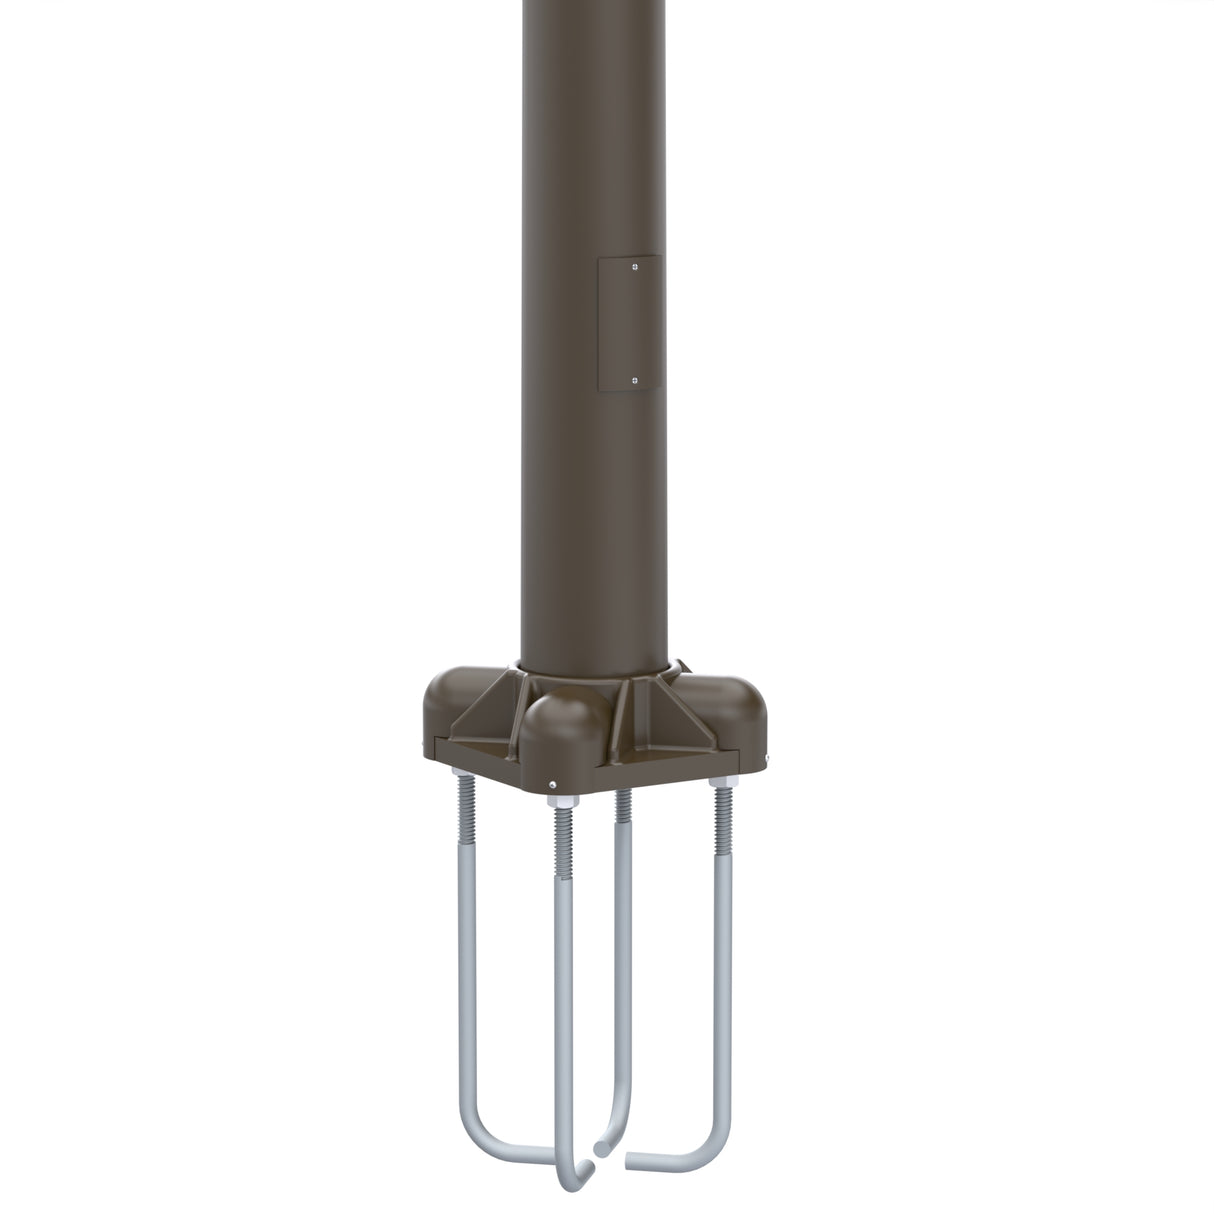 28' Tall x 9.0" Base OD x 4.5" Top OD x 0.188" Thick, Round Tapered Aluminum, Anchor Base Light Pole